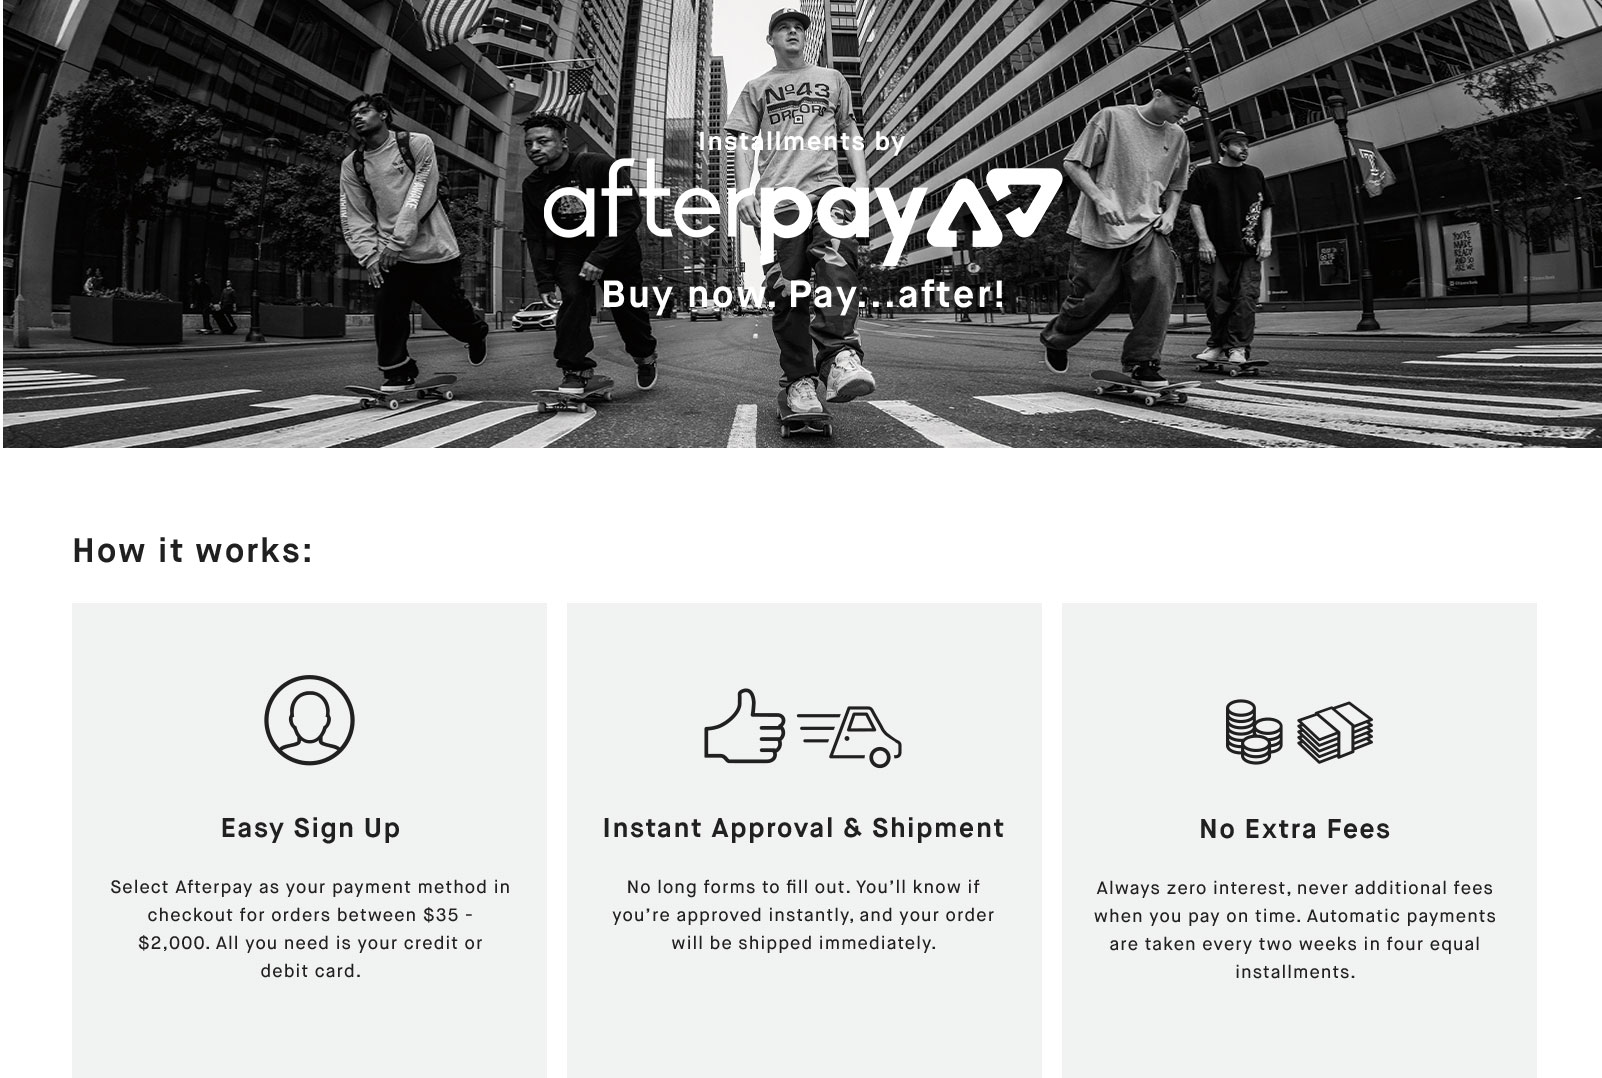 Afterpay - Buy Now, Pay Later | DC Shoes